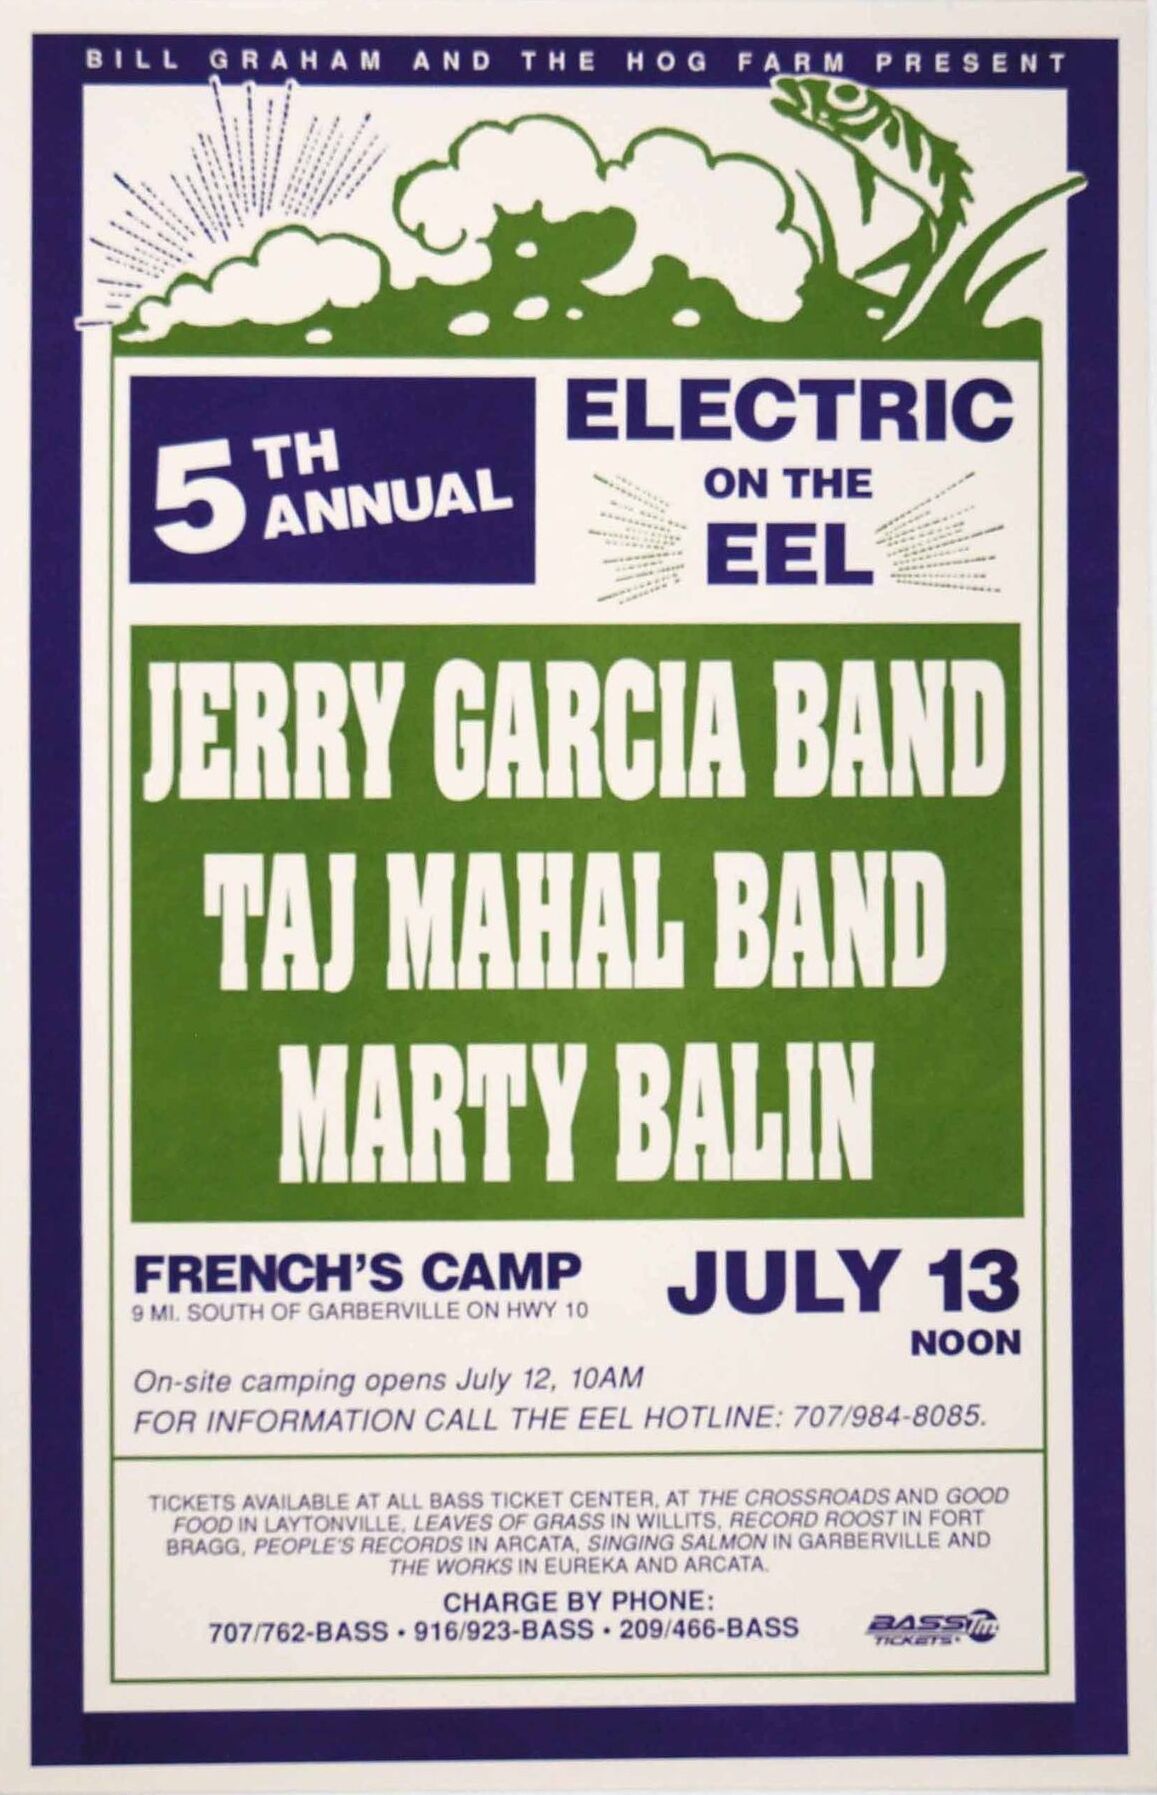 Jerry Garcia Band The 5th Annual Electric on the Eel 1991 Concert Poster